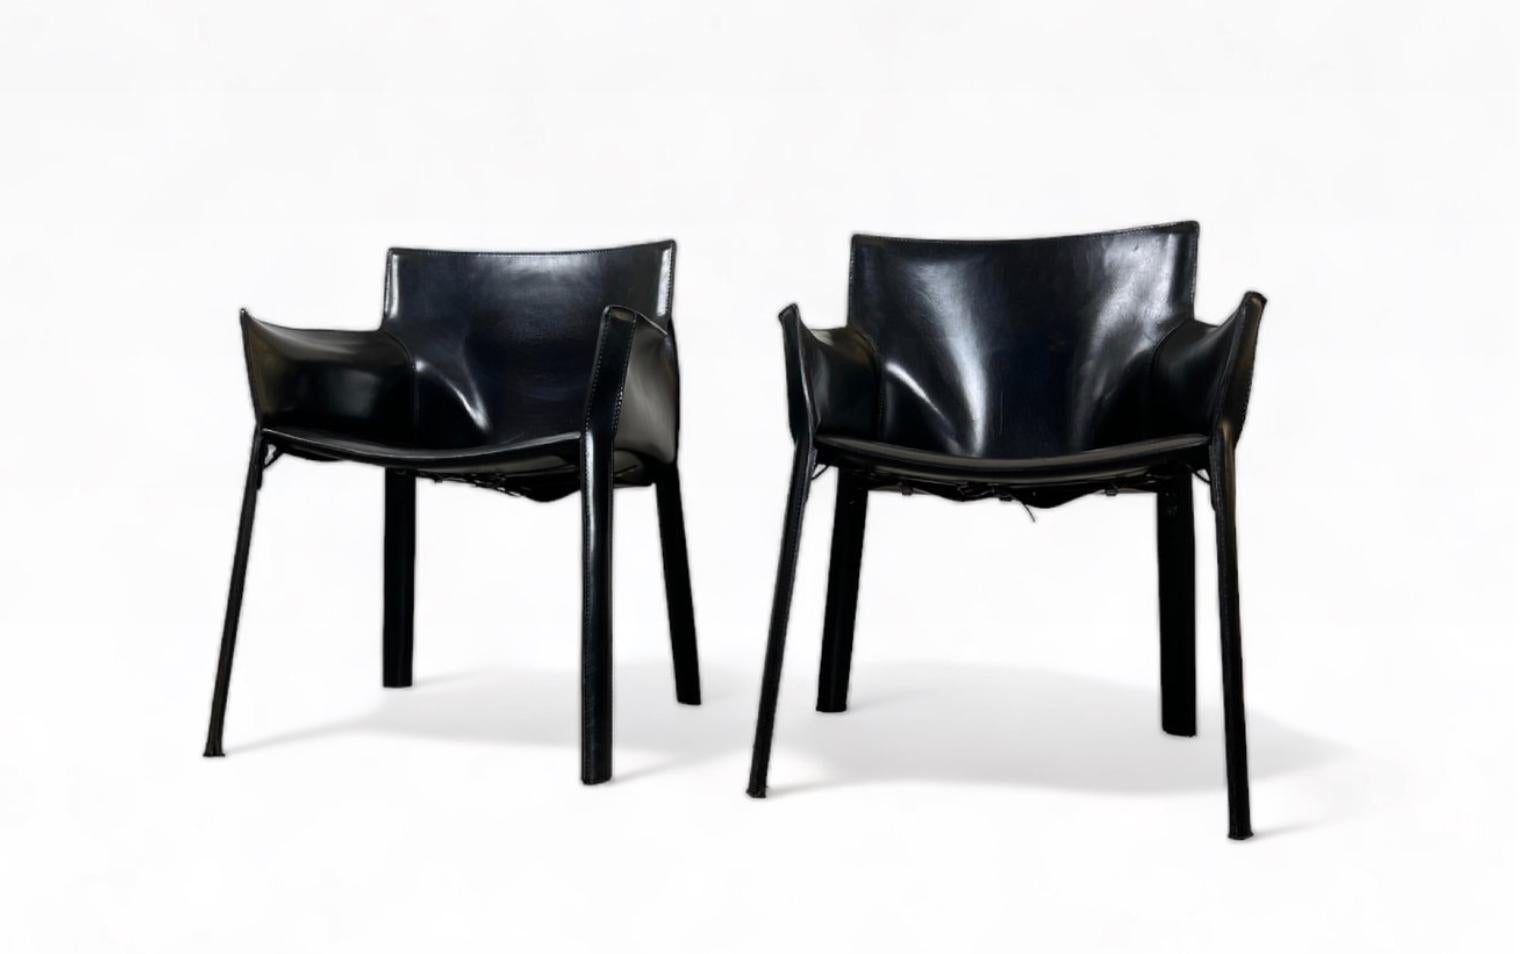 Late 20th Century 1970s Black Saddle Leather Armchairs by Giancarlo Vegni for Fasem, Italy For Sale